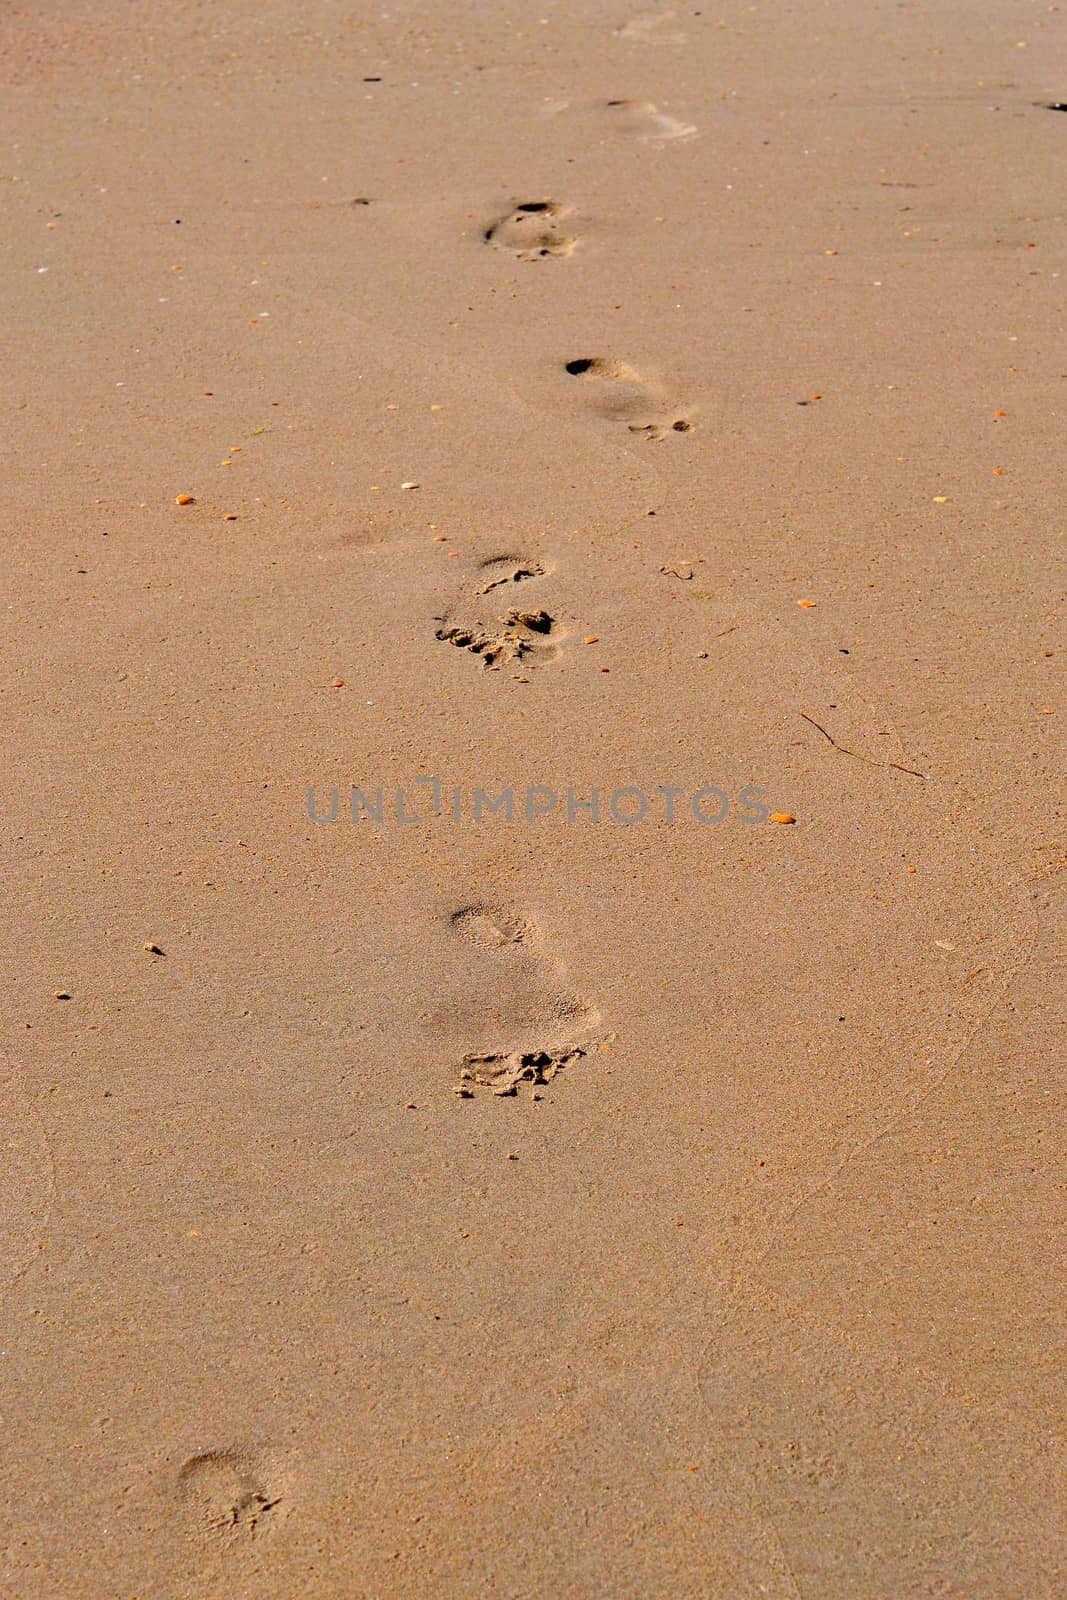 Trace of a bare foot of the person on sand.